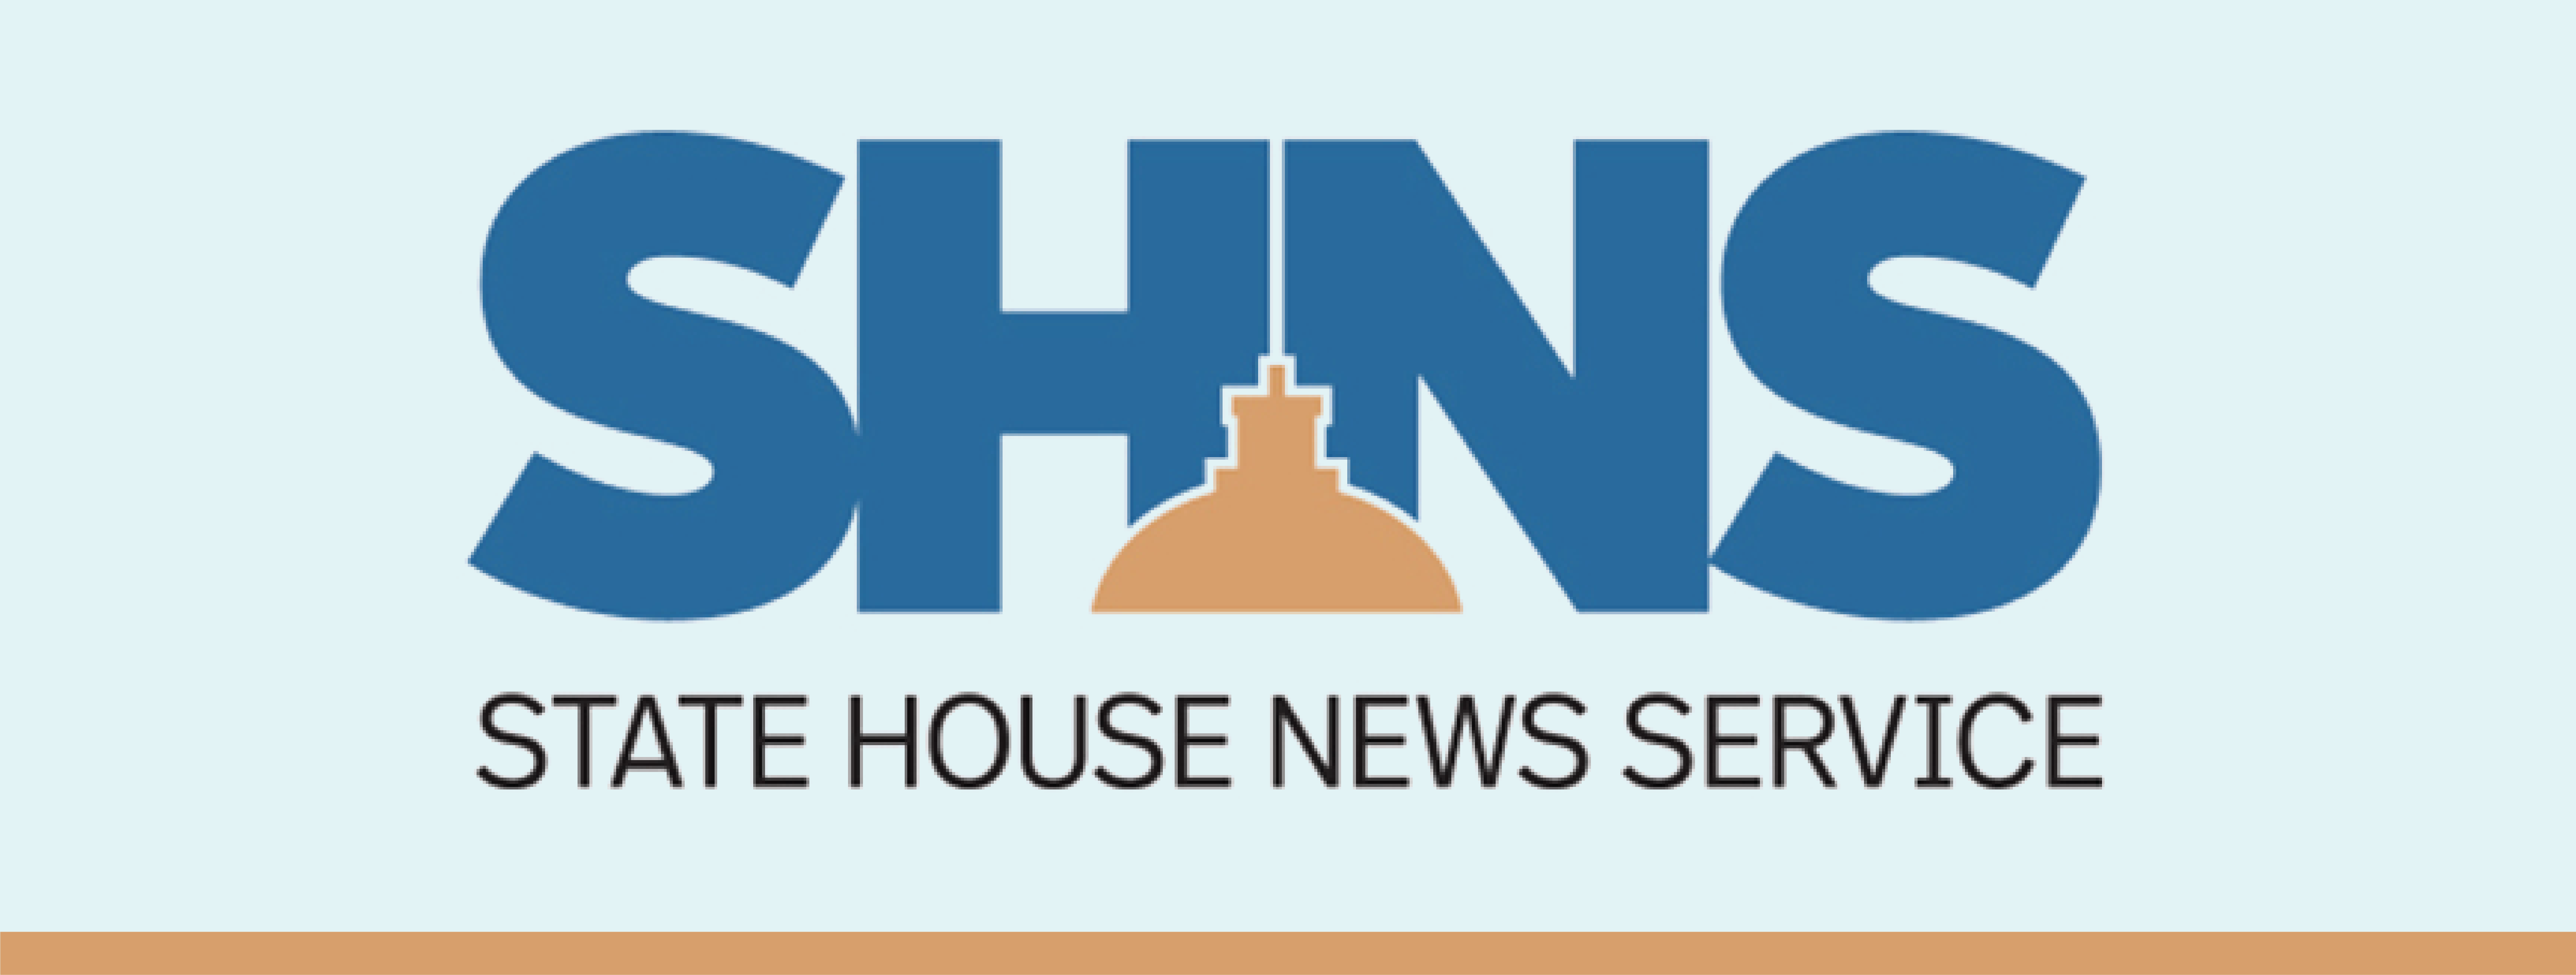 State House News